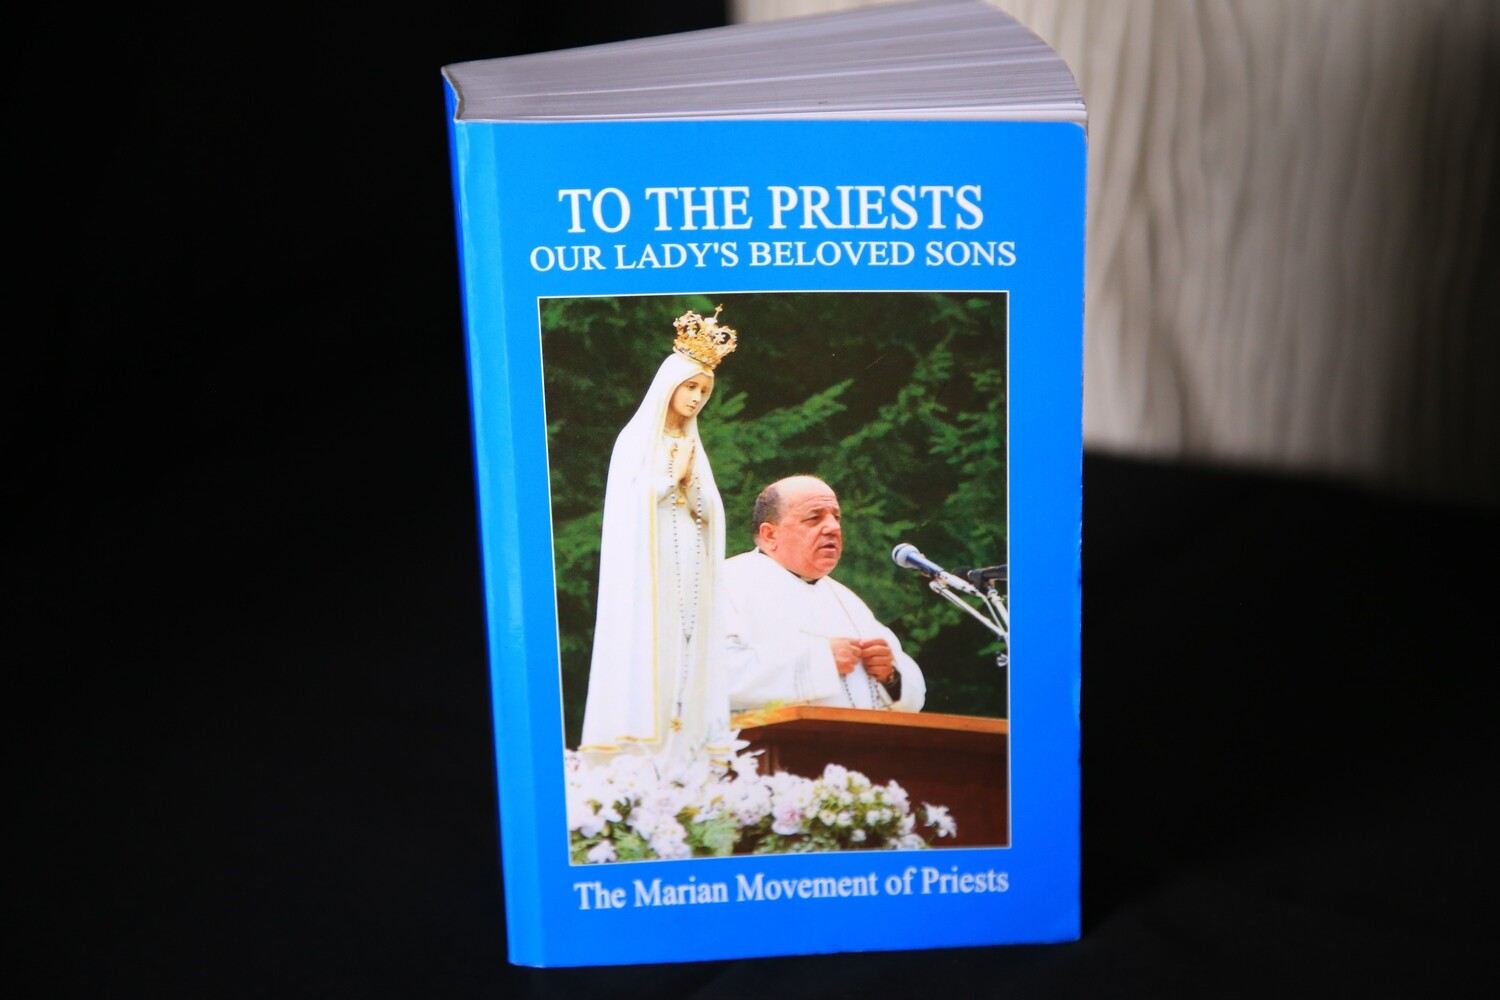 Donation Only to receive a brand new copy of the blue book.:
To The Priests Our Lady's Beloved Sons -The Marian Movement for Priests by Fr Gobbi